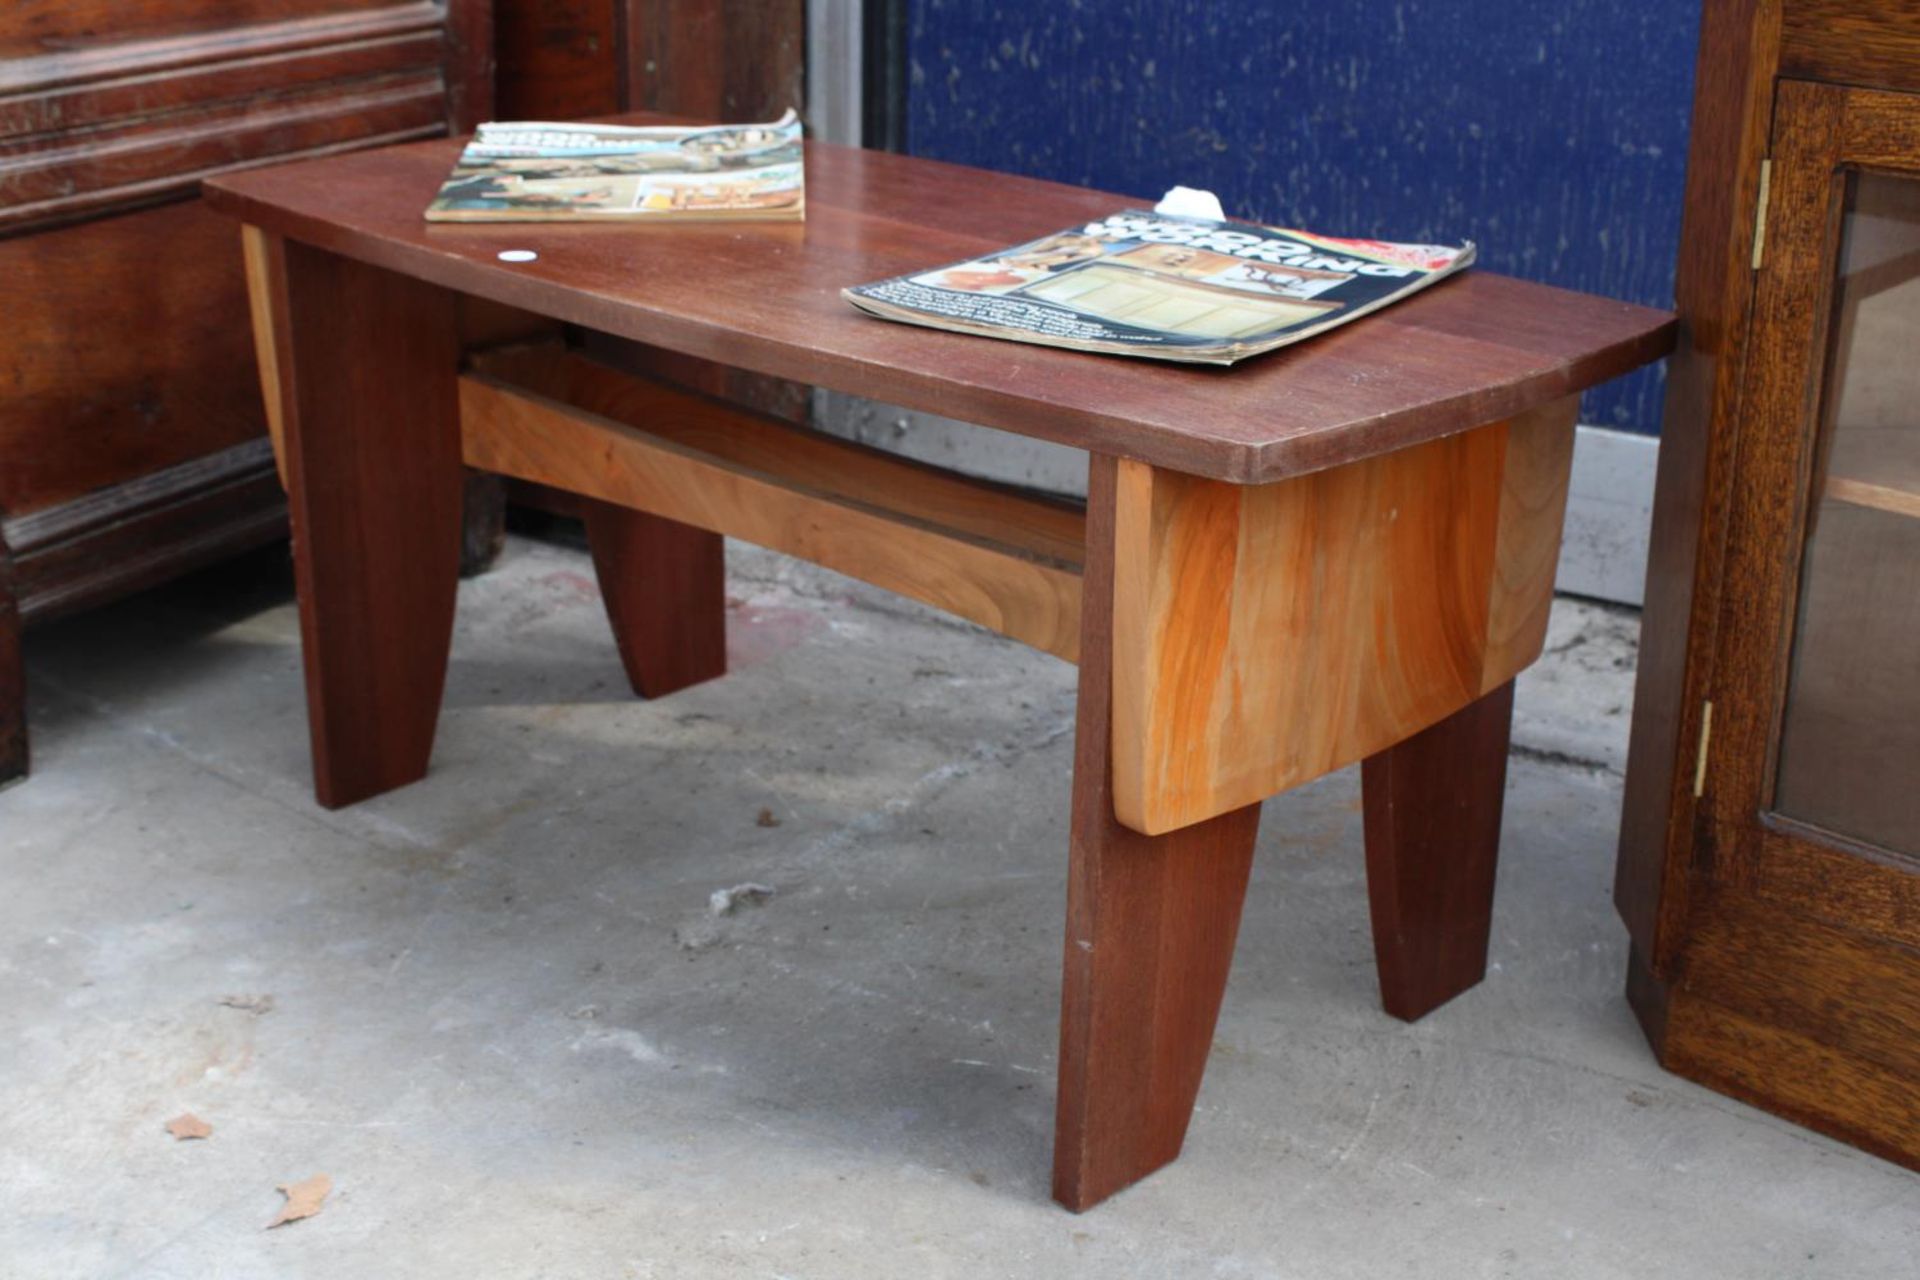 A GORDON WARR CONTRASTING HARDWOOD COFFEE TABLE AND AN OAK CORNER CABINET - Image 2 of 8